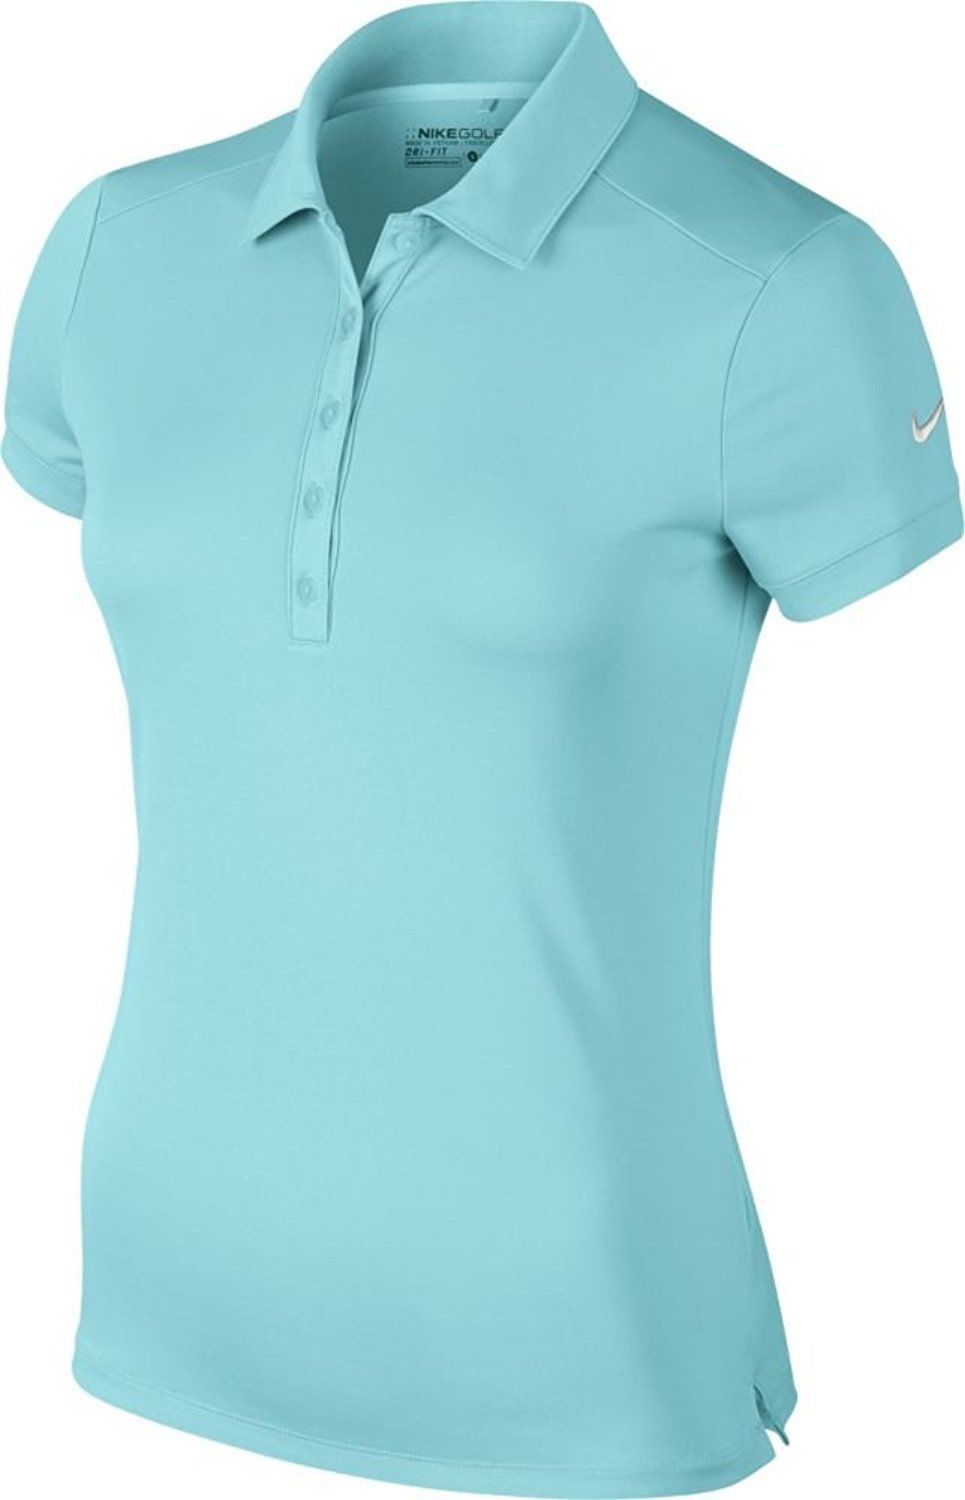 NIKE Women's SZ S VICTORY SOLID Polo GOLF SHIRT TOP 725582 466 MINT GREEN SMALL - $45.77